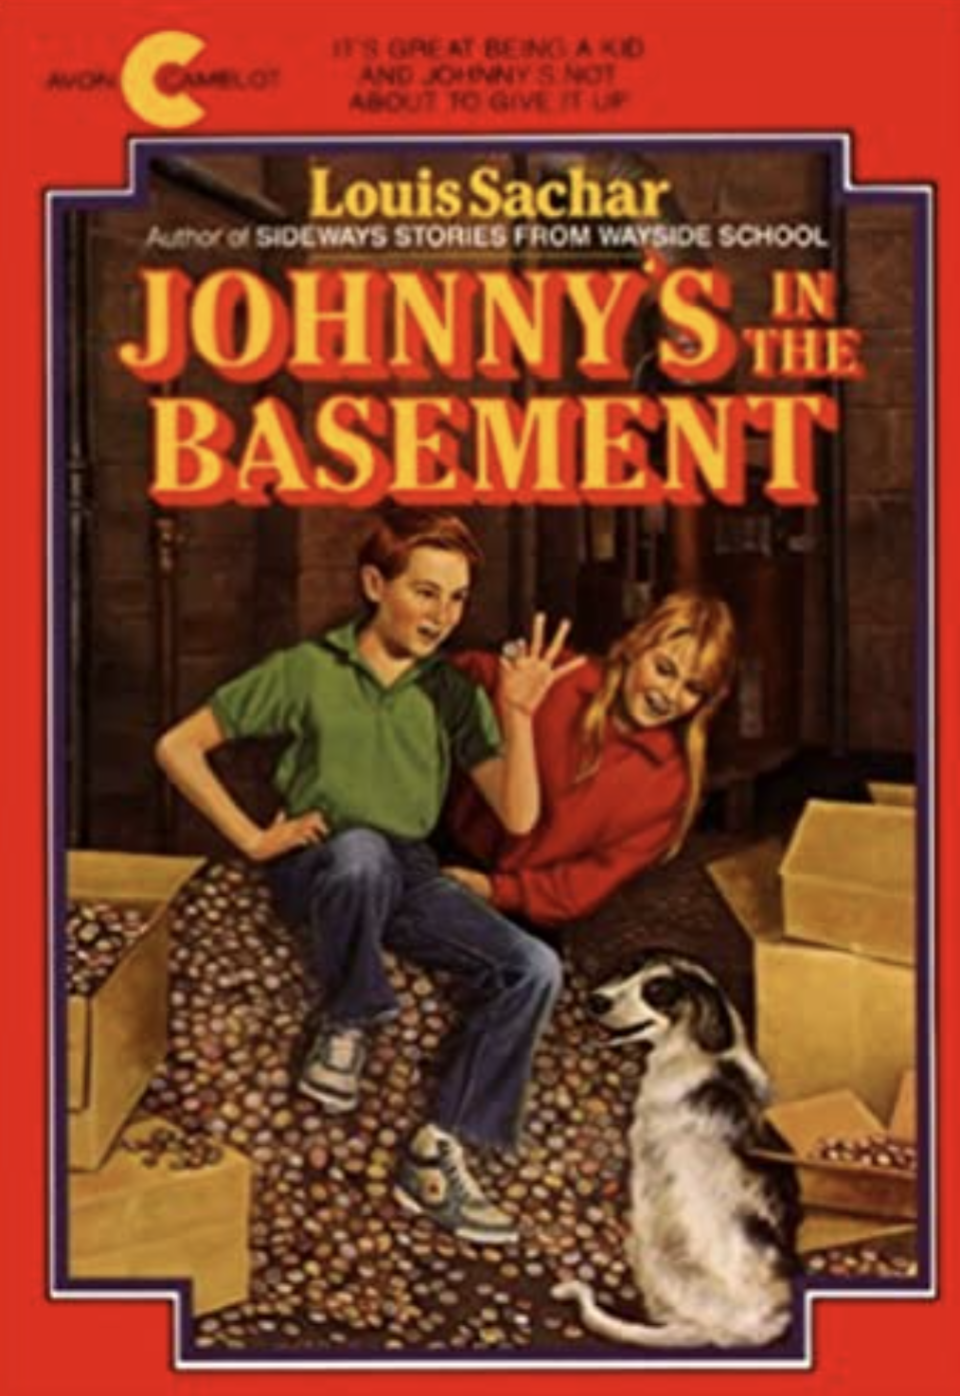 "Johnny's in the Basement"